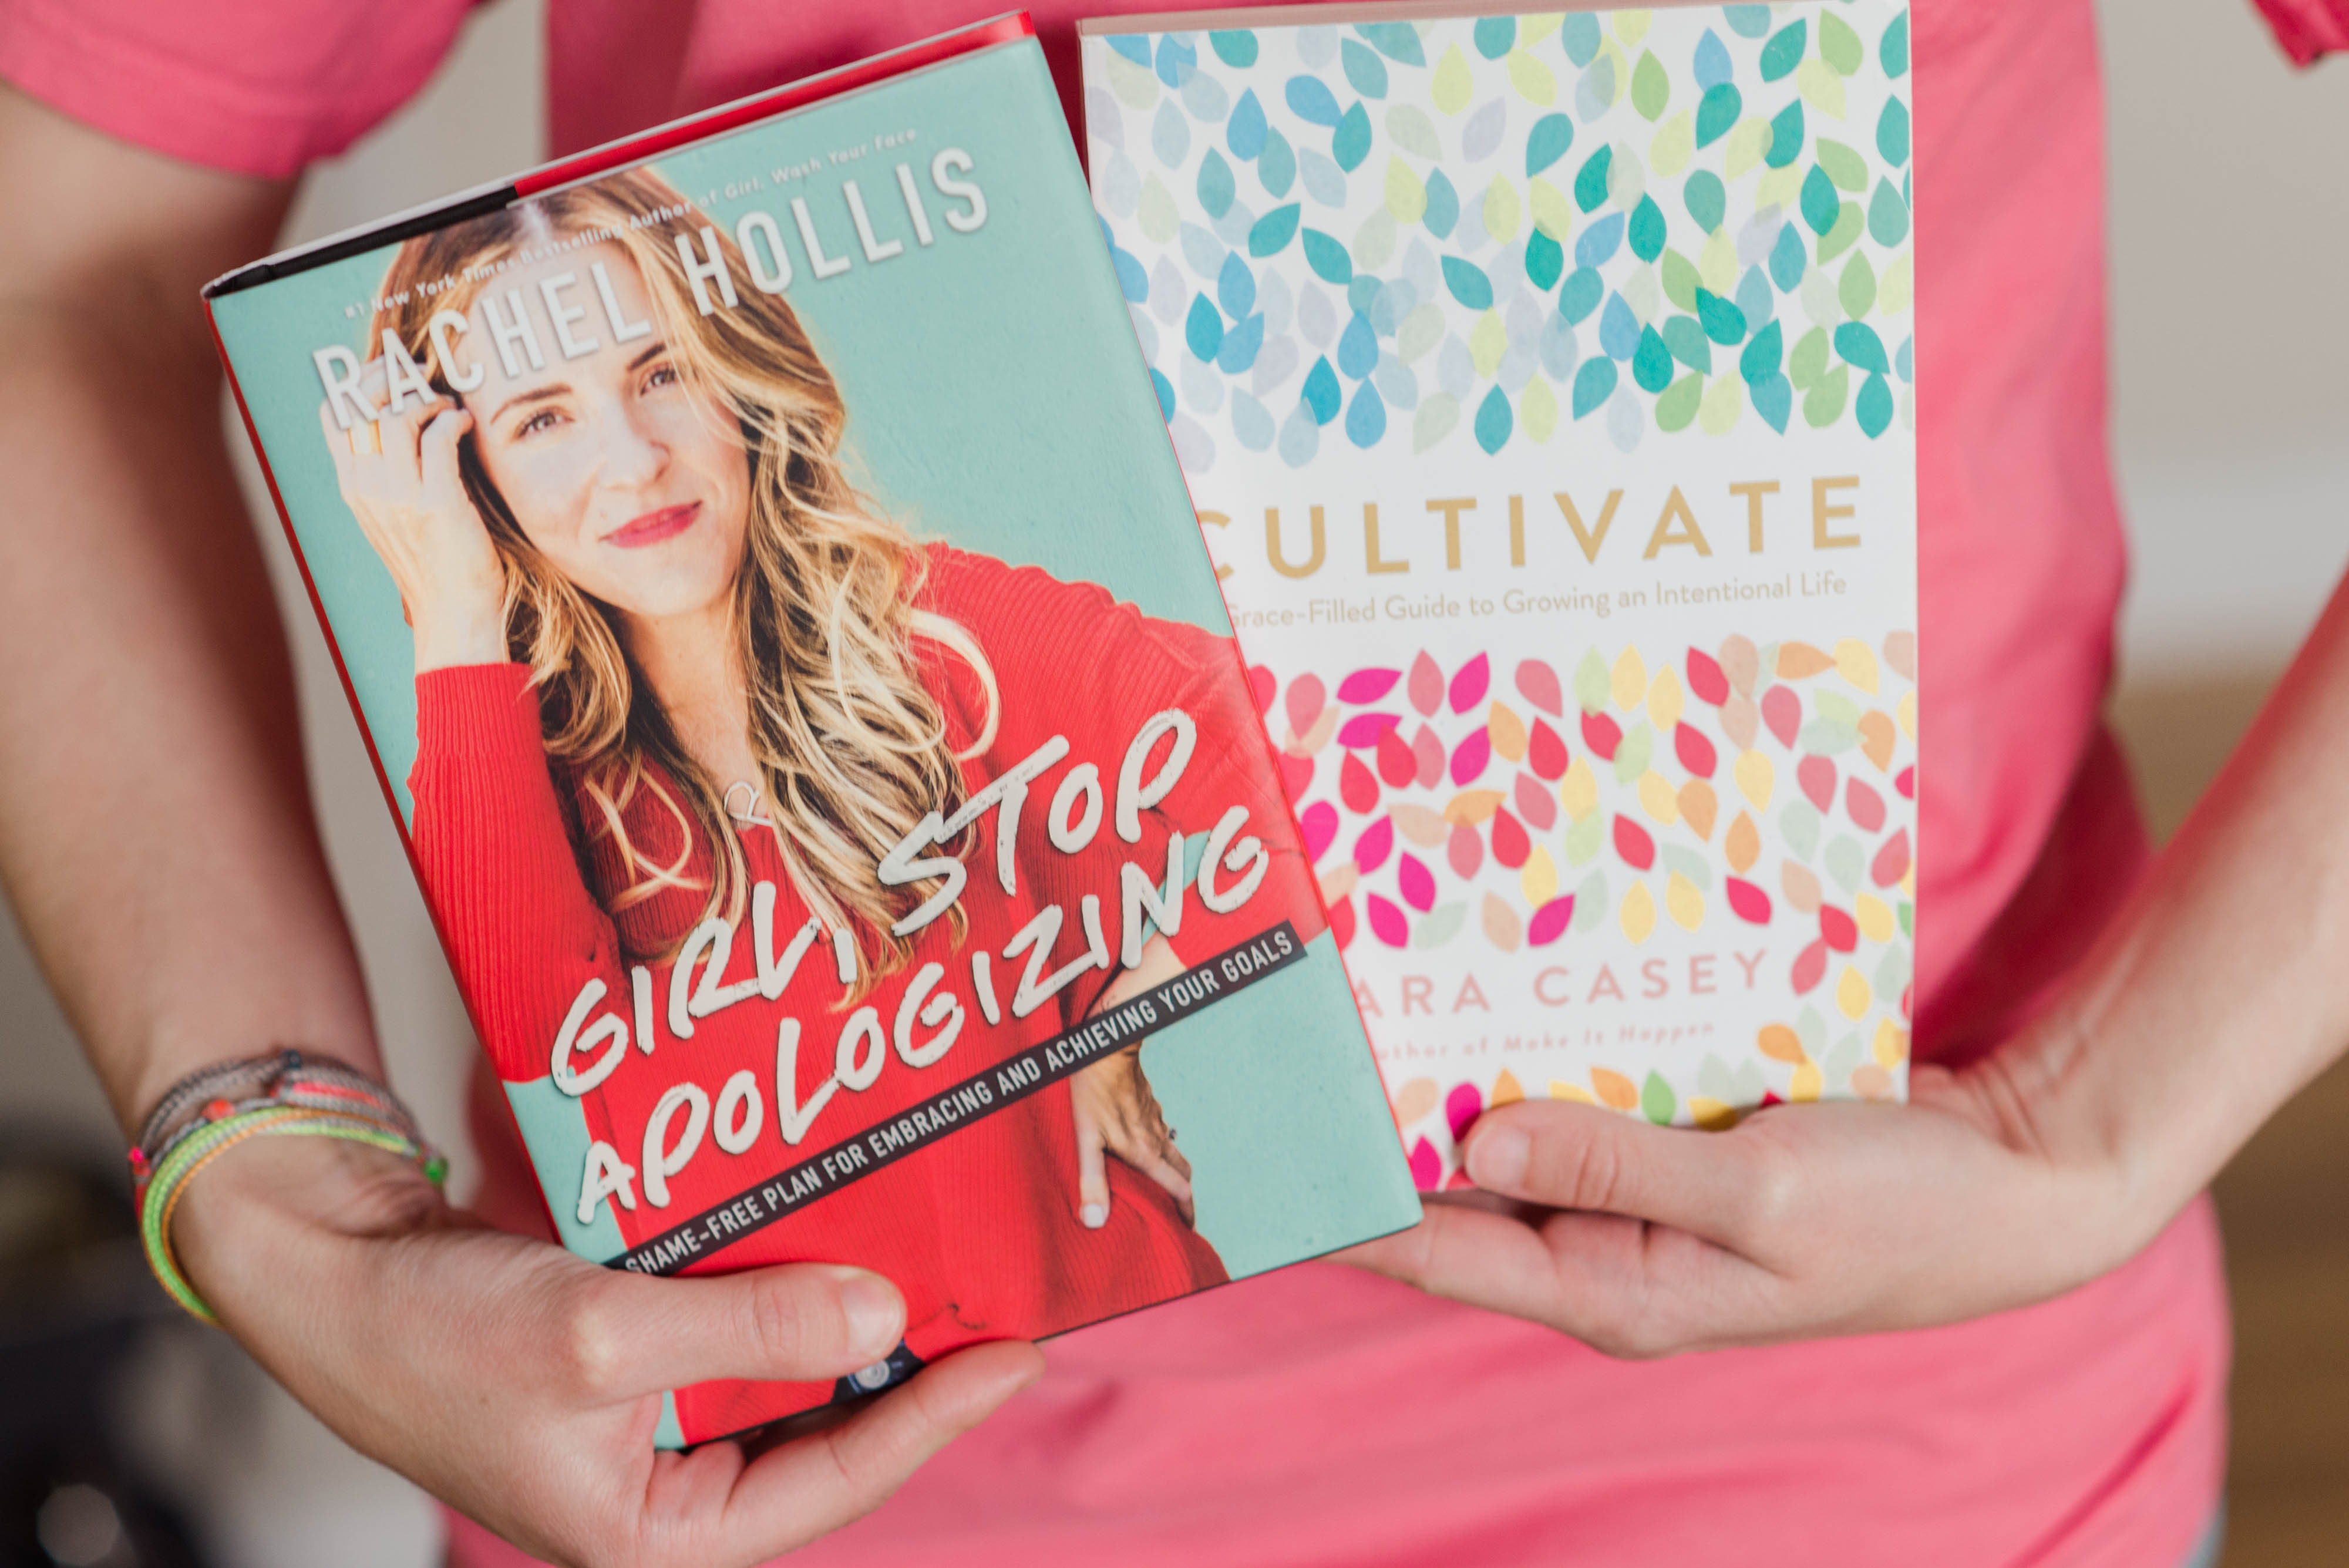 Girl Stop Apologizing by Rachel Hollis and Cultivate by Lara Casey.